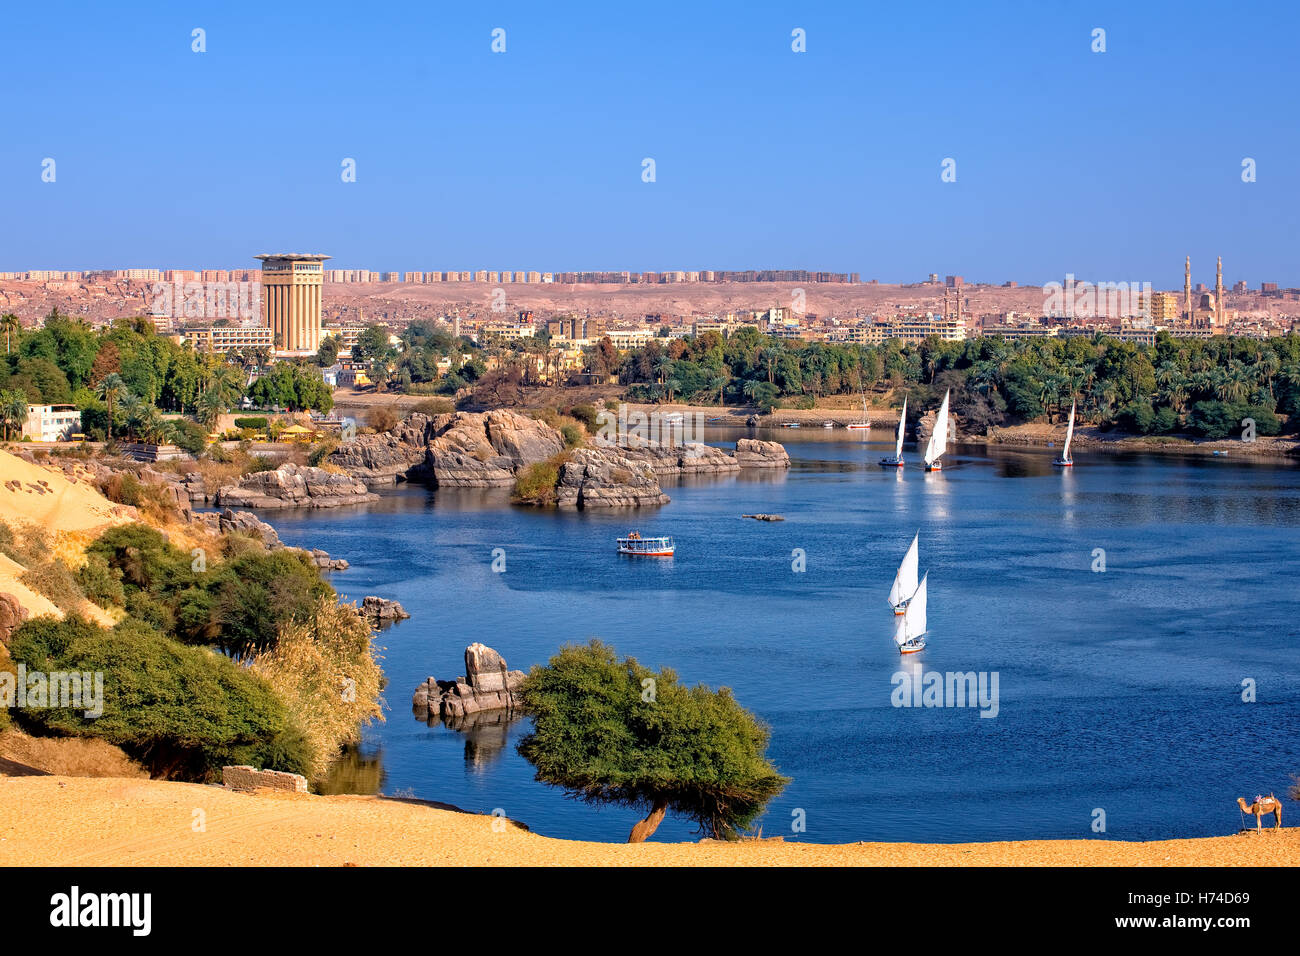 Aswan and Nile river in Egypt Stock Photo